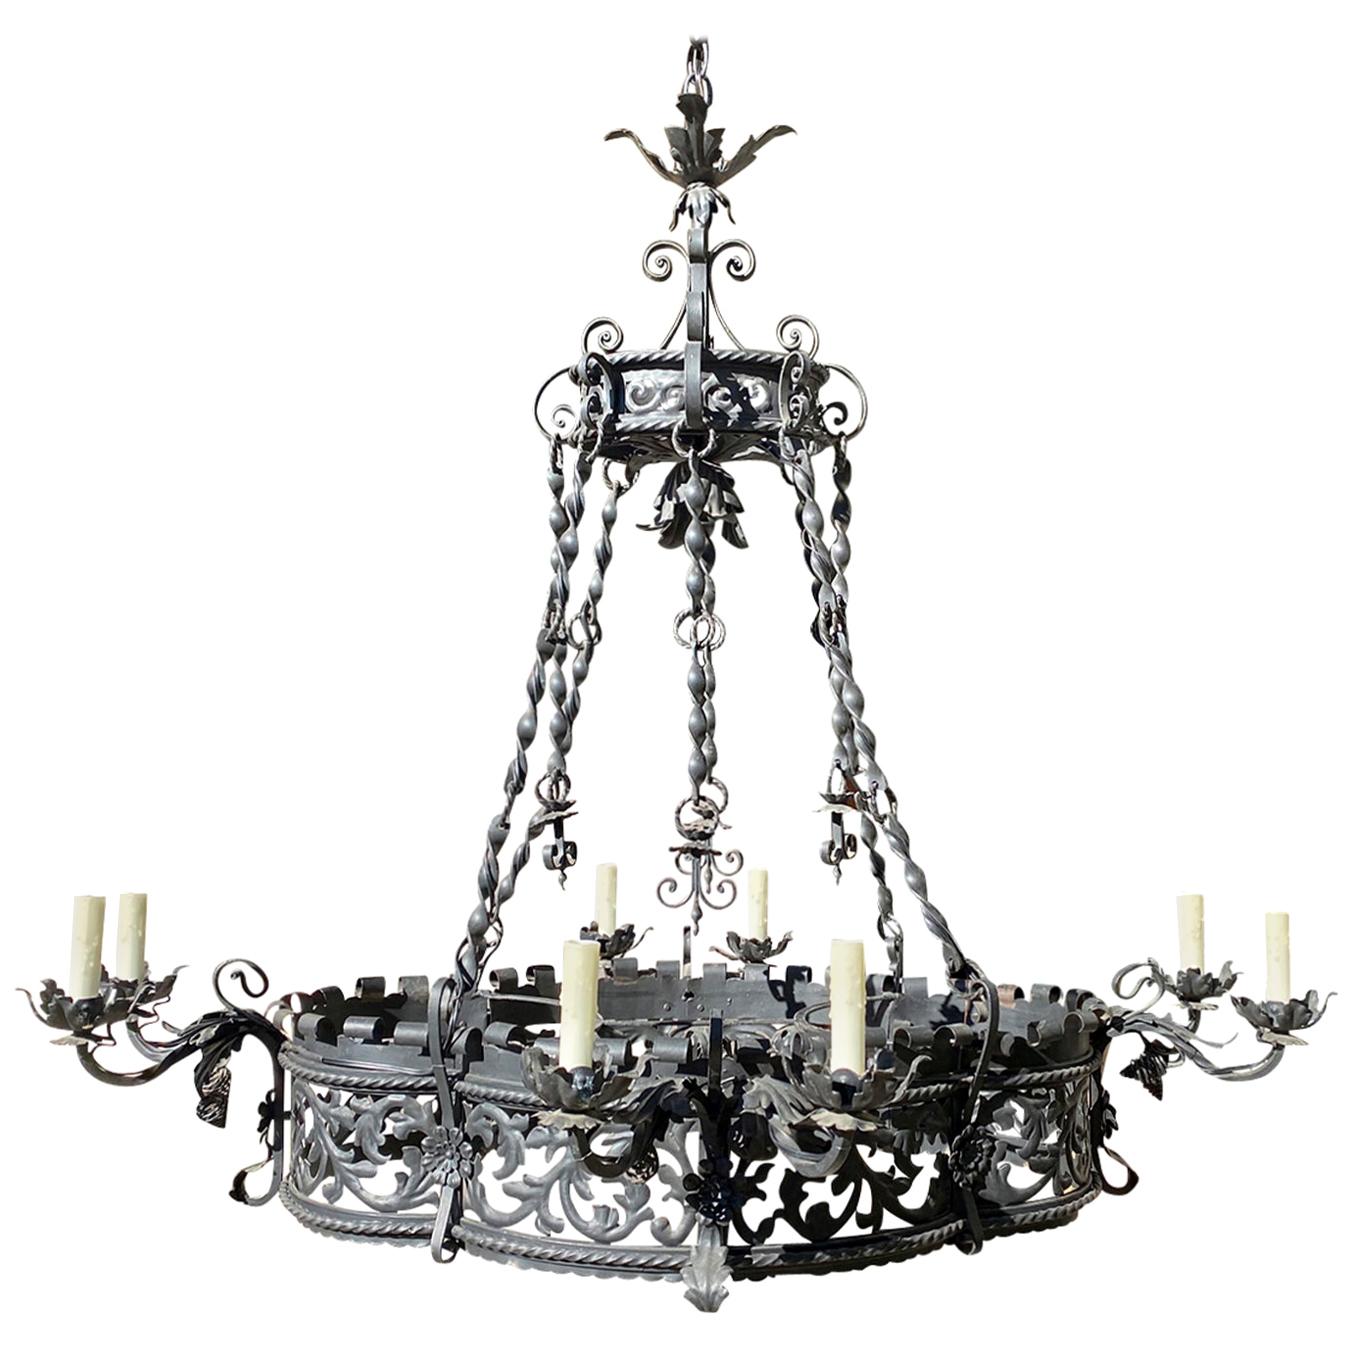 19th-Early 20th Century Continental Wrought Iron Eight-Arm Chandelier For Sale